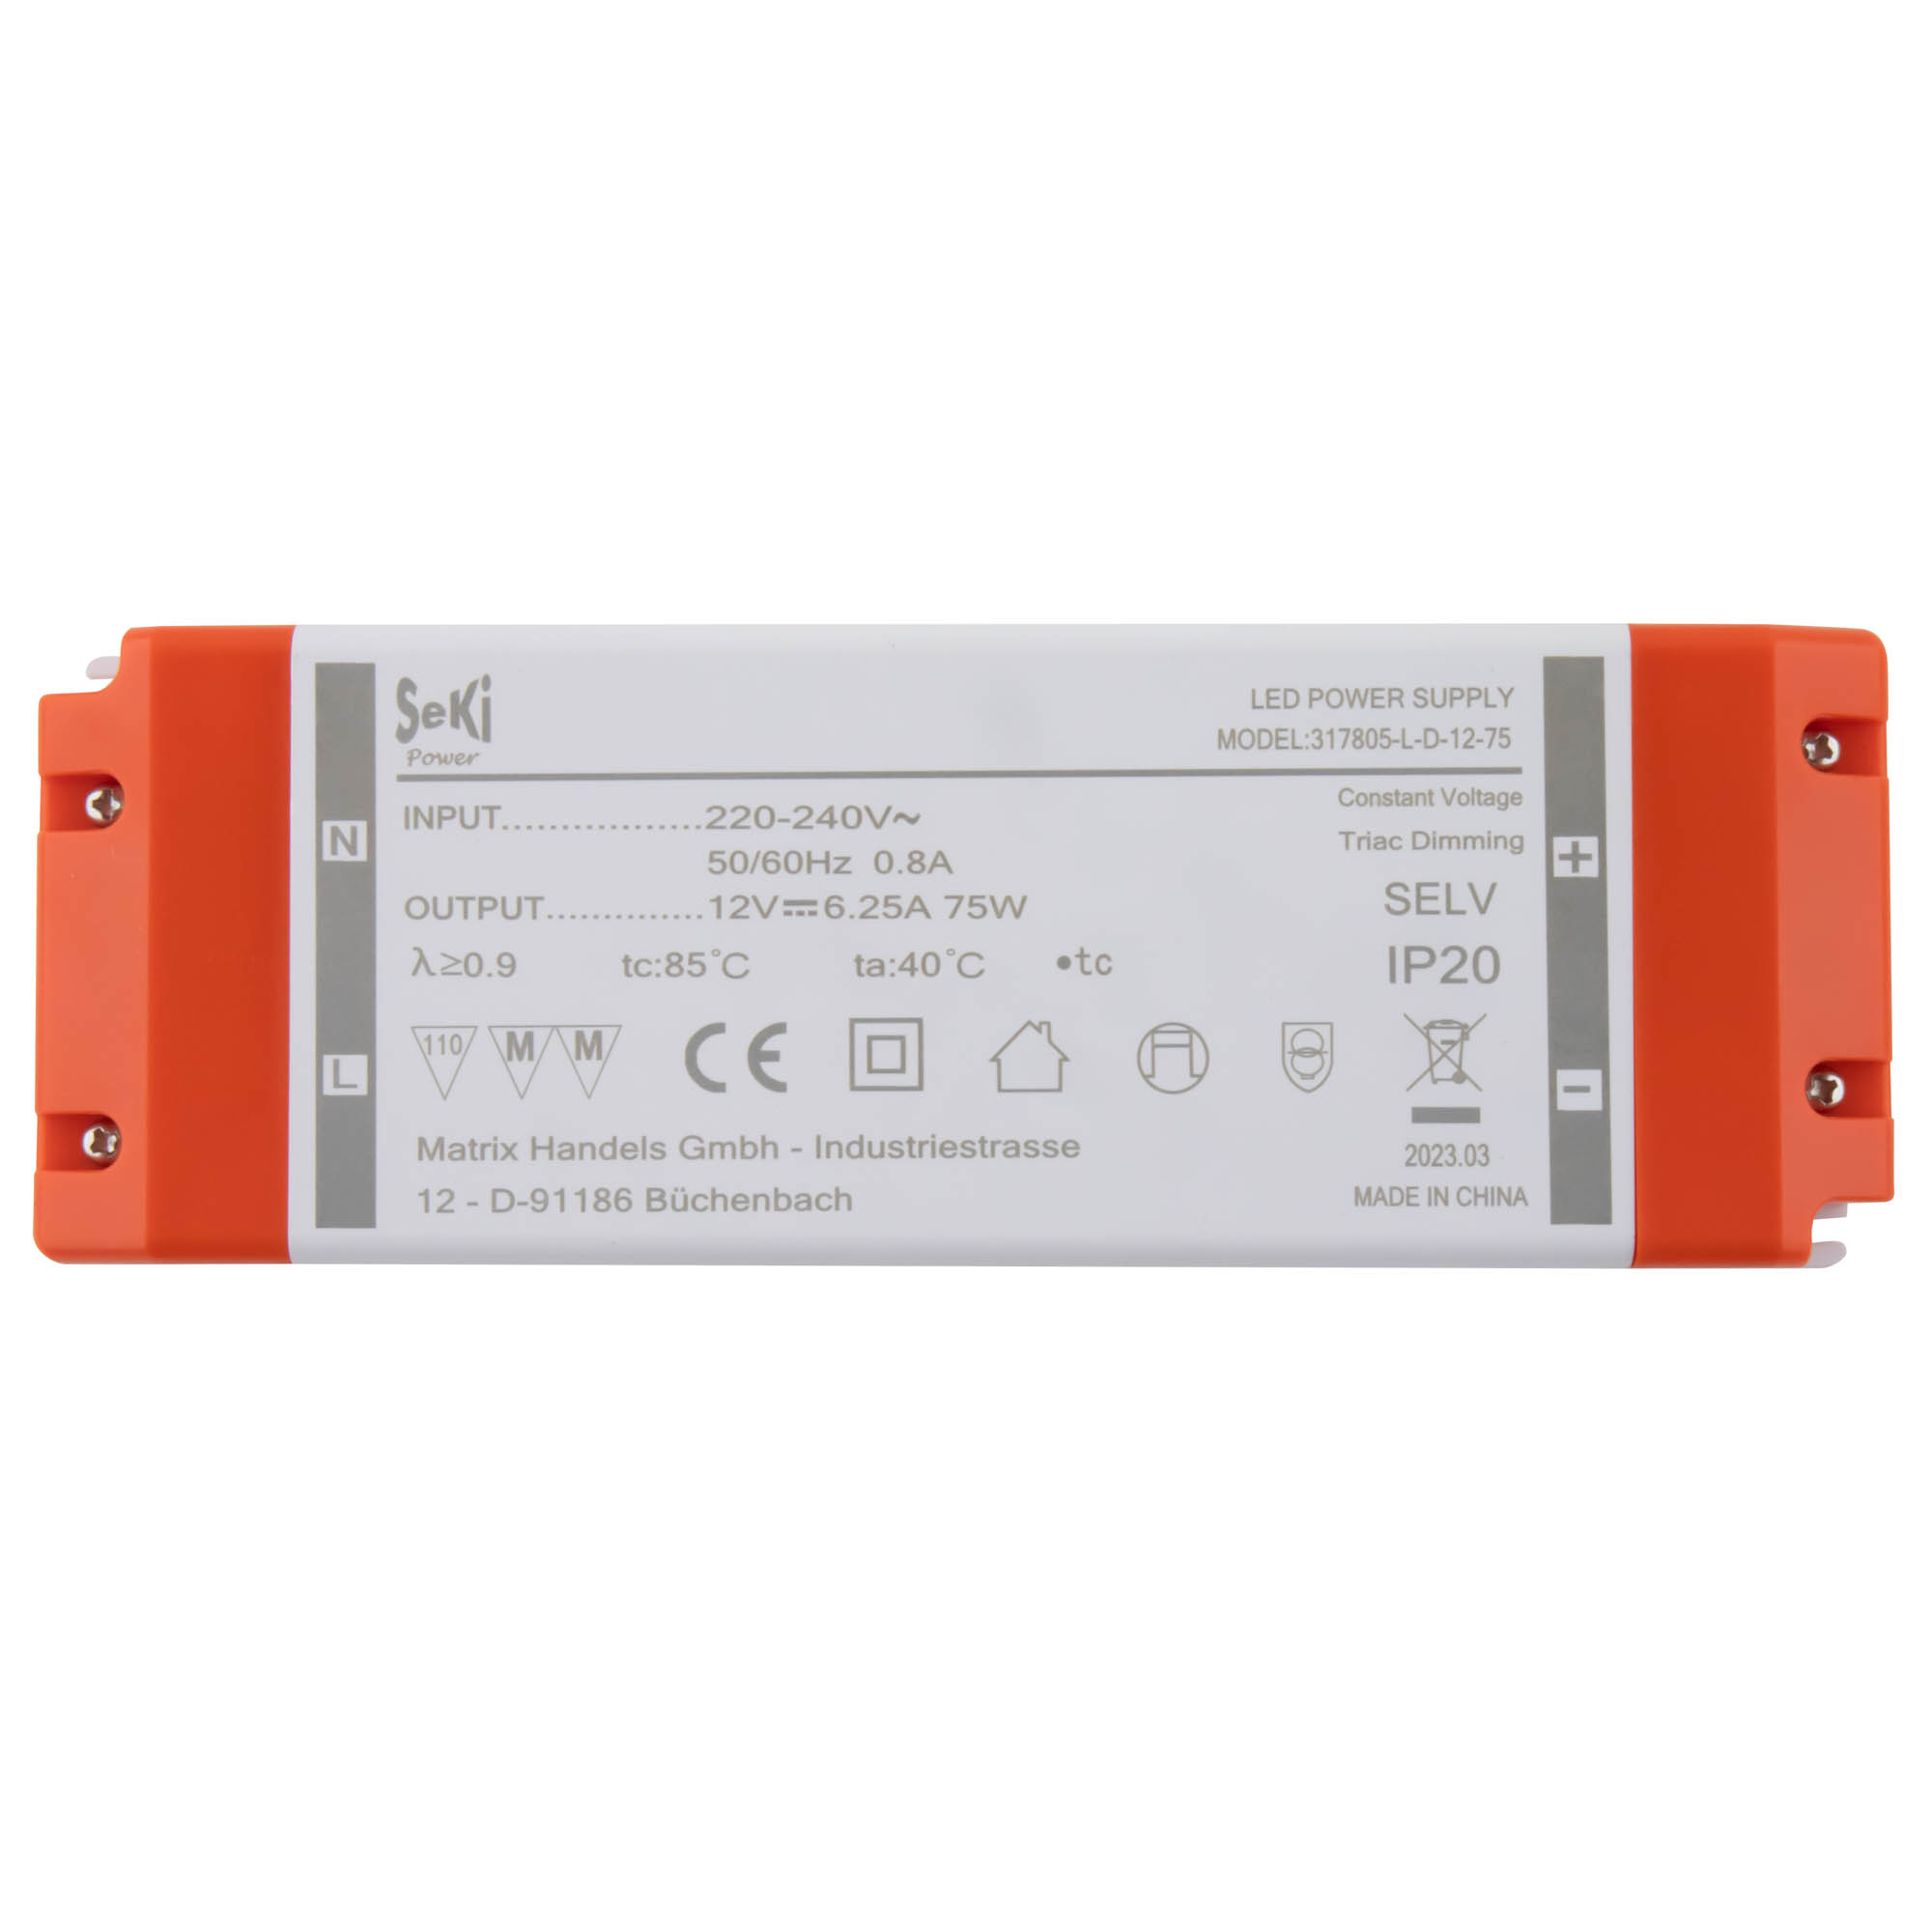 LED power supply dimmable L-D-12-75 - 12V - 6.25A - 75W